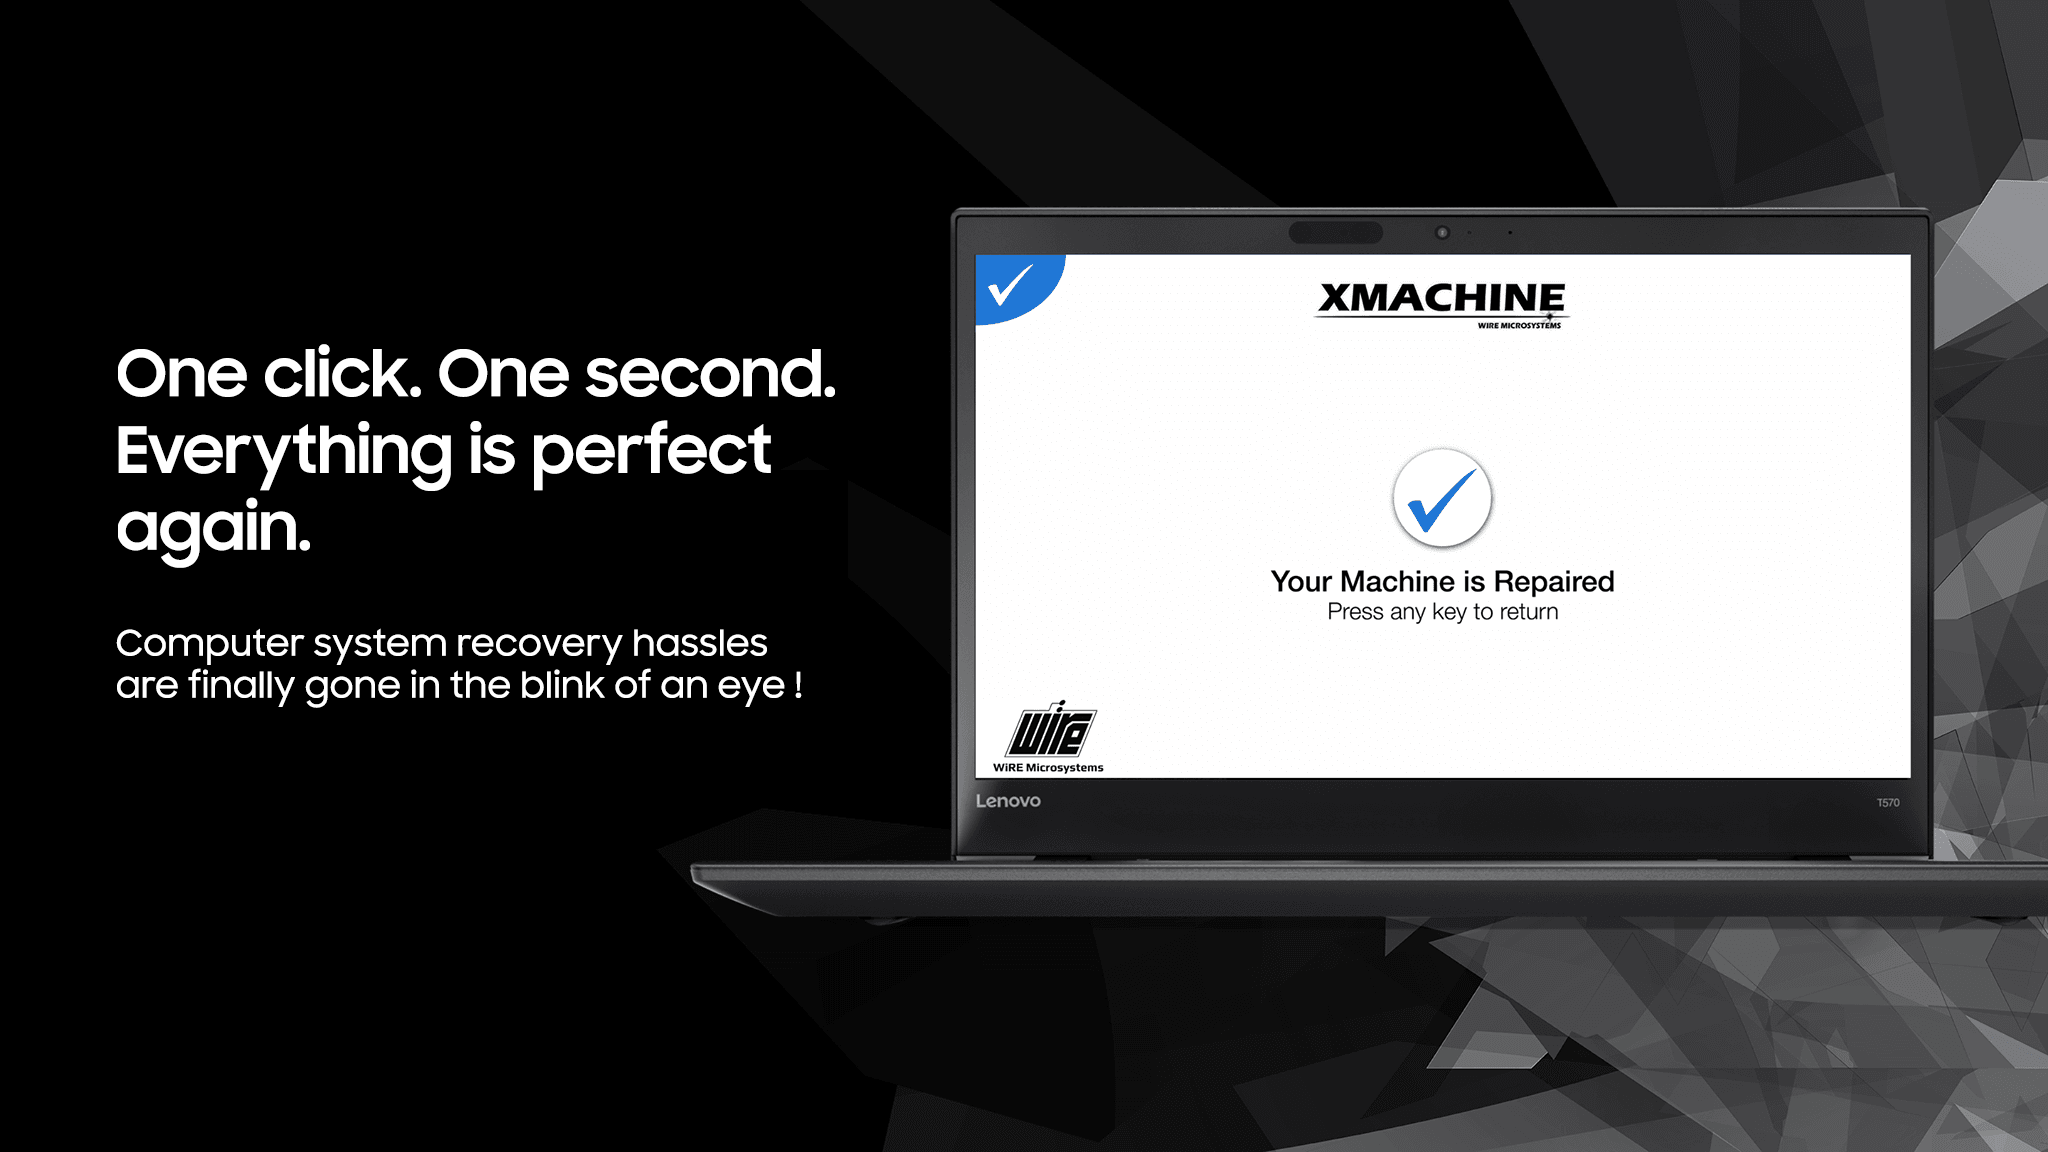 WiRE Microsystems XMACHINE - The World's Fastest System Recovery Solution - One Click. One Second. Everything is perfect again.